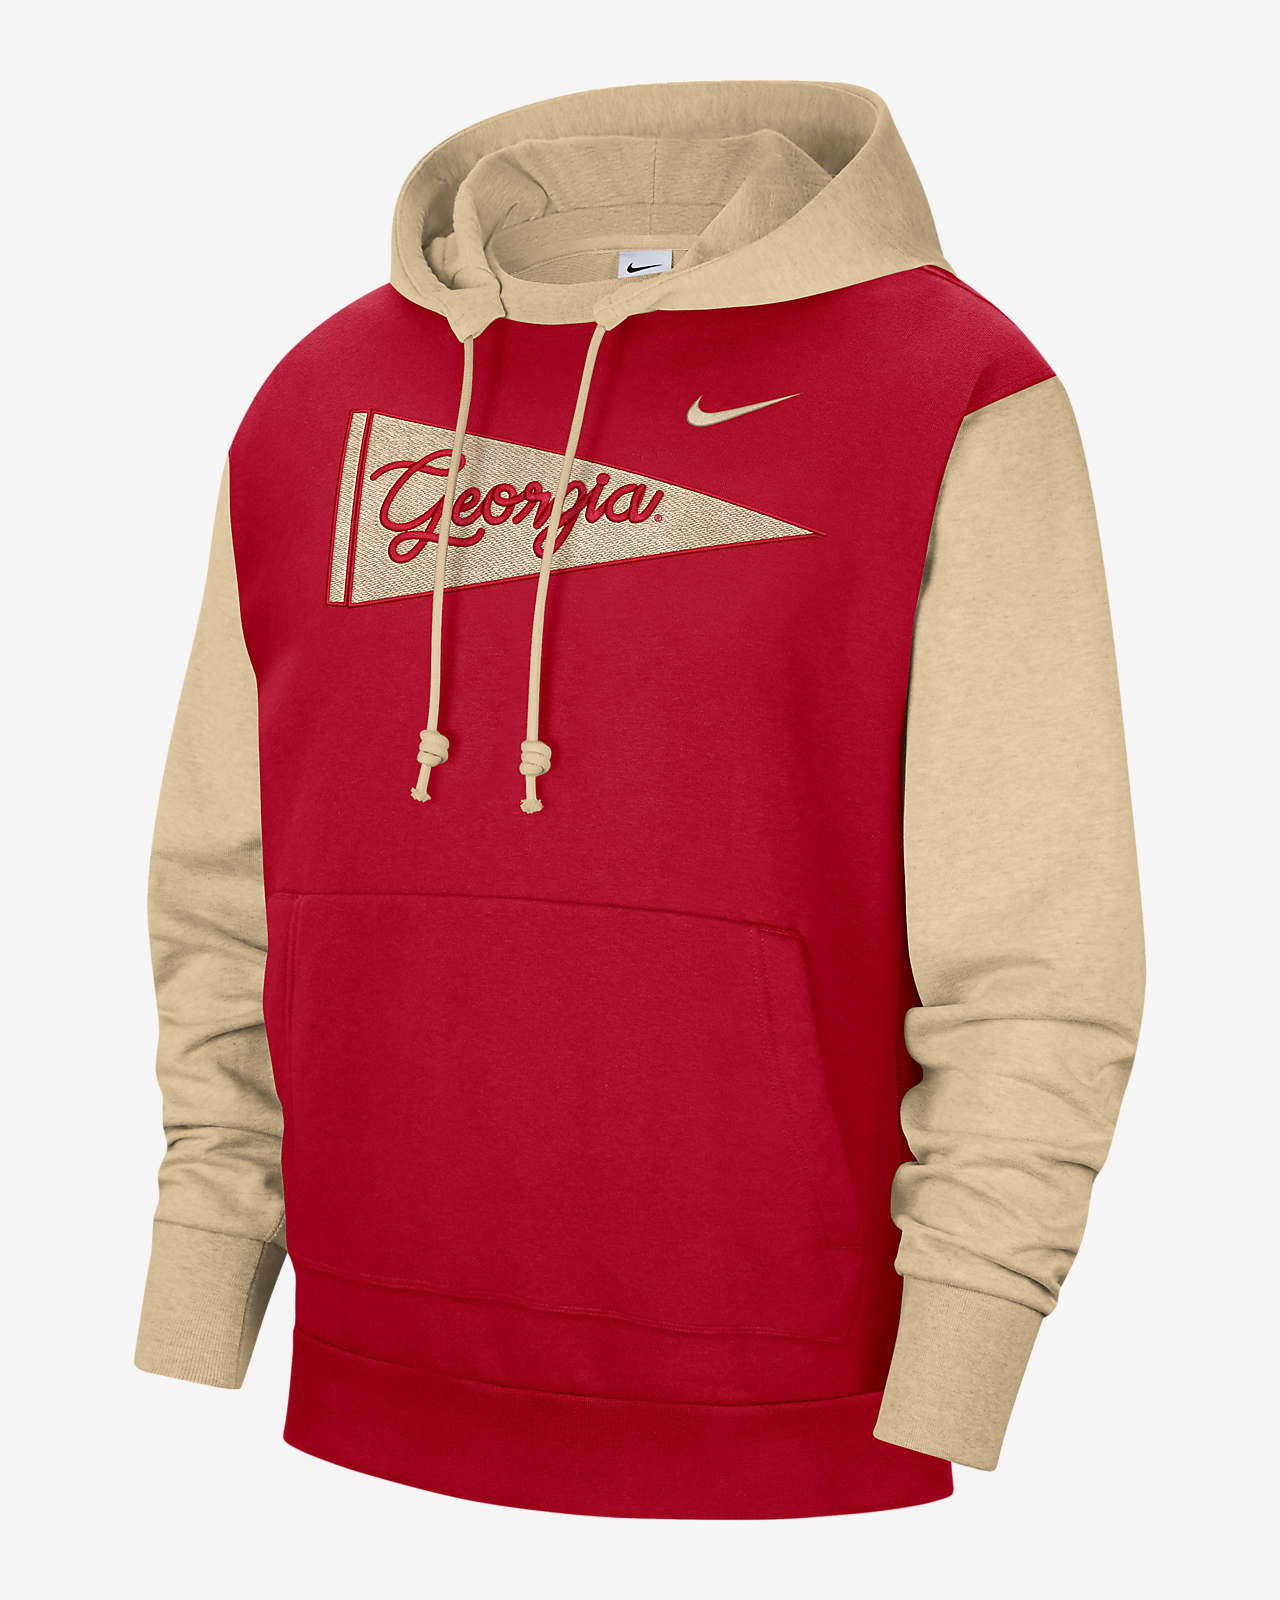 Best men's hoodies and sweatshirts for 2023: Nike to Gucci